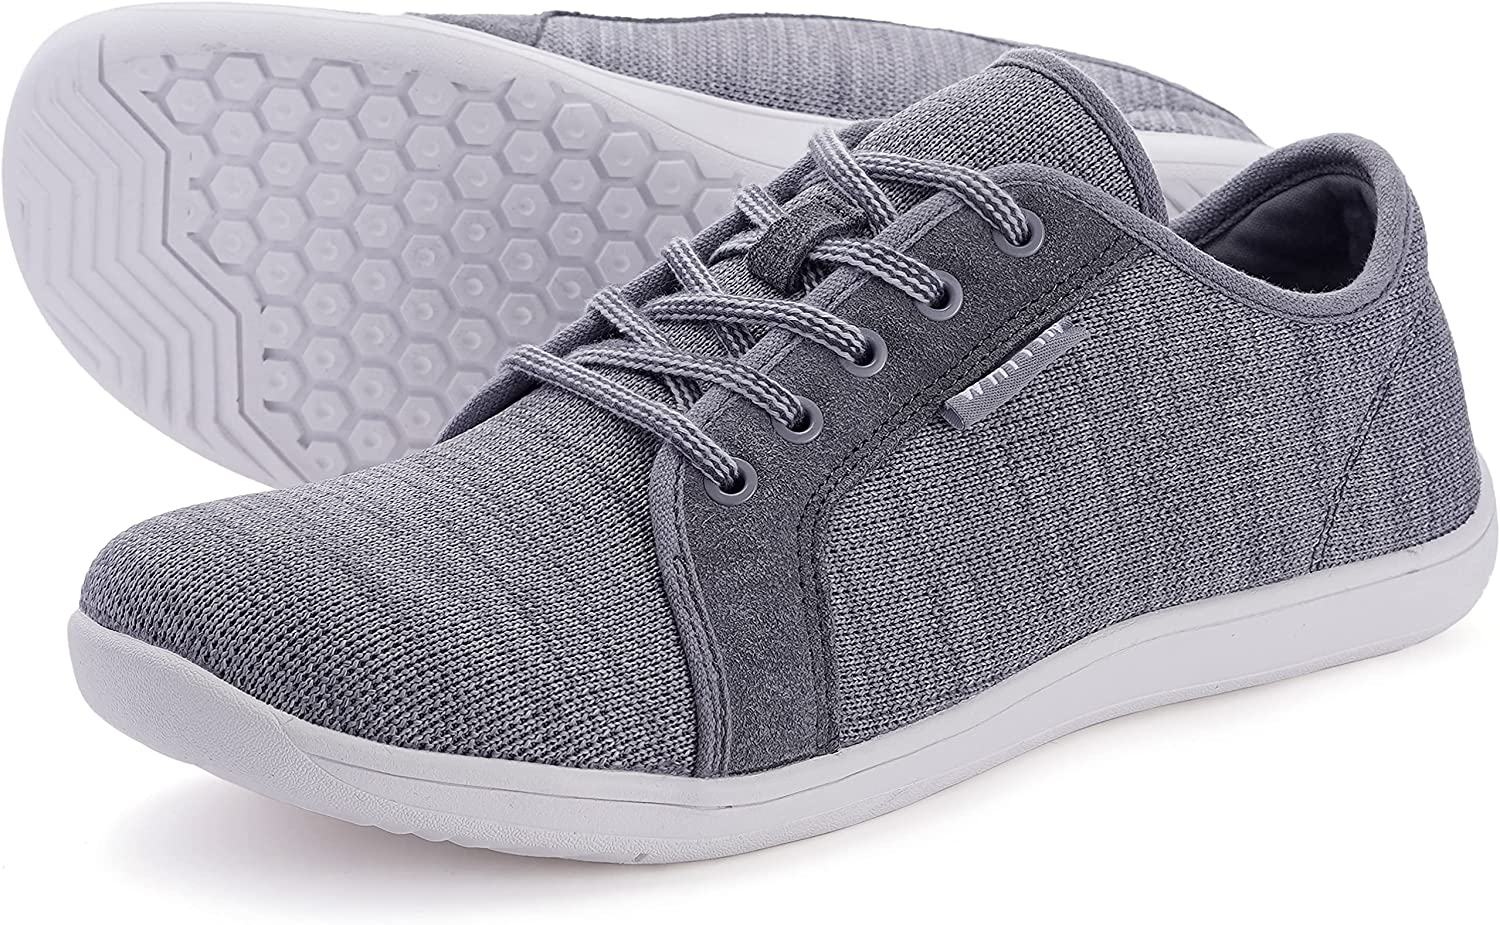 WHITIN Men's Extra Wide fit Casual Barefoot Sneakers Arch Support Zero Drop Sole W81 Size 12W Minimus Minimalist Laces Up Tennis Shoes Fashion Walking Lightweight Comfortable Male Grey Gum 45 